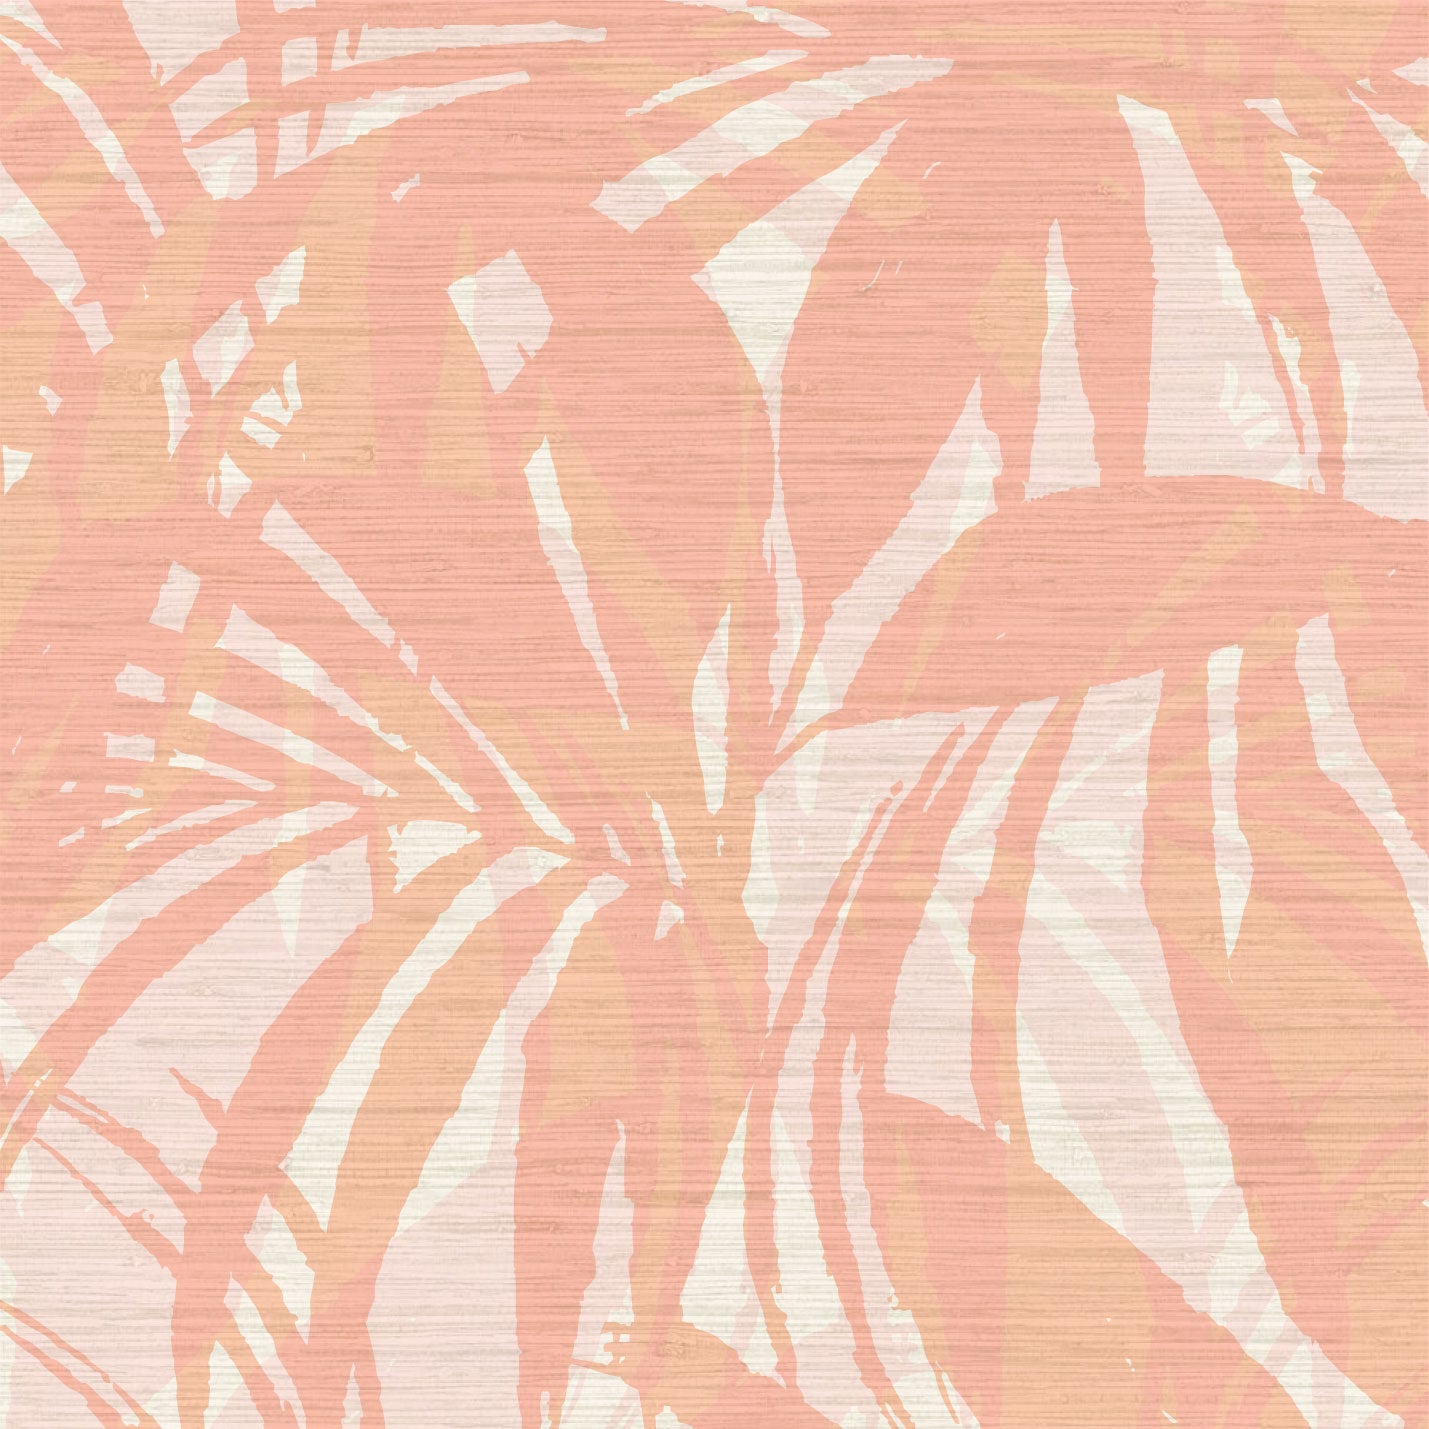 printed grasscloth wallpaper oversize tropical leaf Natural Textured Eco-Friendly Non-toxic High-quality Sustainable practices Sustainability Interior Design Wall covering Bold retro chic custom jungle garden botanical Seaside Coastal Seashore Waterfront Vacation home styling Retreat Relaxed beach vibes Beach cottage Shoreline Oceanfront white palm  coral orange pink